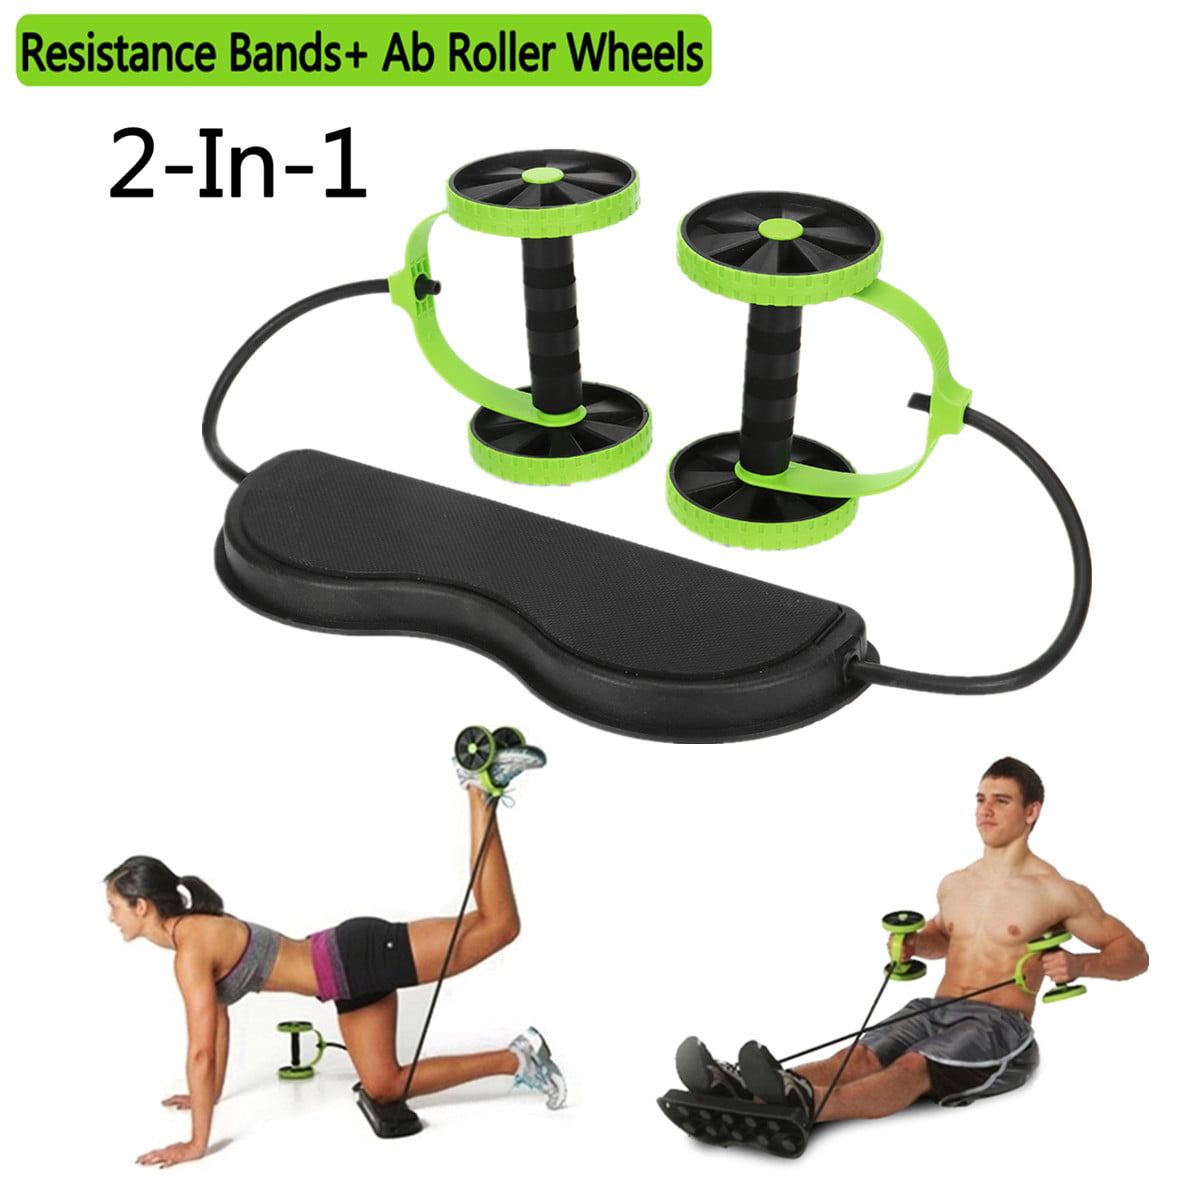 AB MASTER DUAL WHEEL POWER ROLLER Body Workout Exerciser Abdominal Core Muscle 